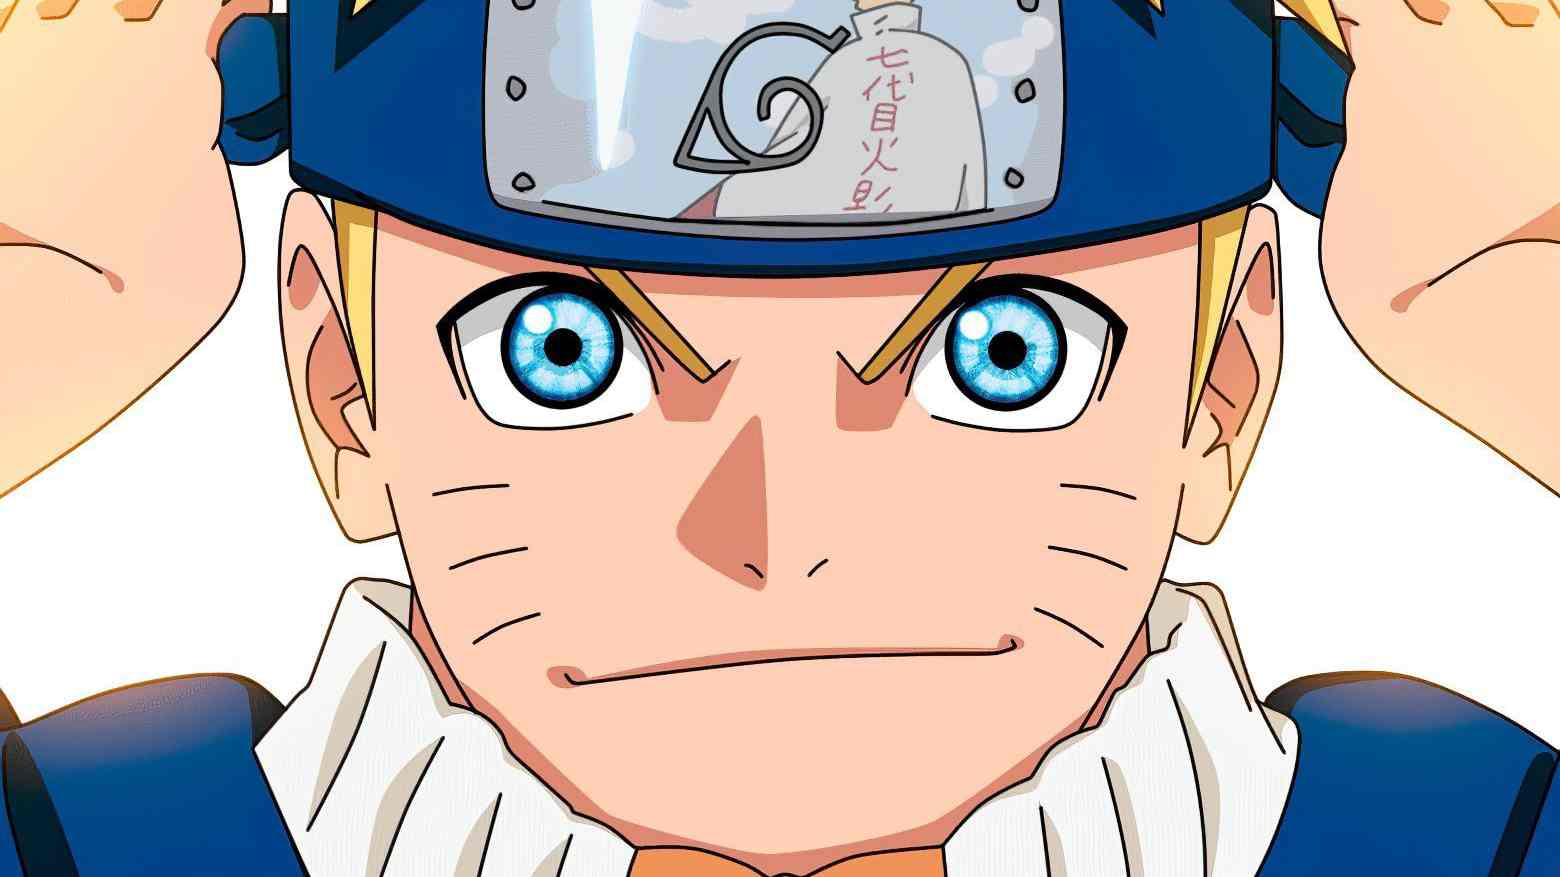 Naruto 20th Anniversary 4-episode anime to be delayed to “increase